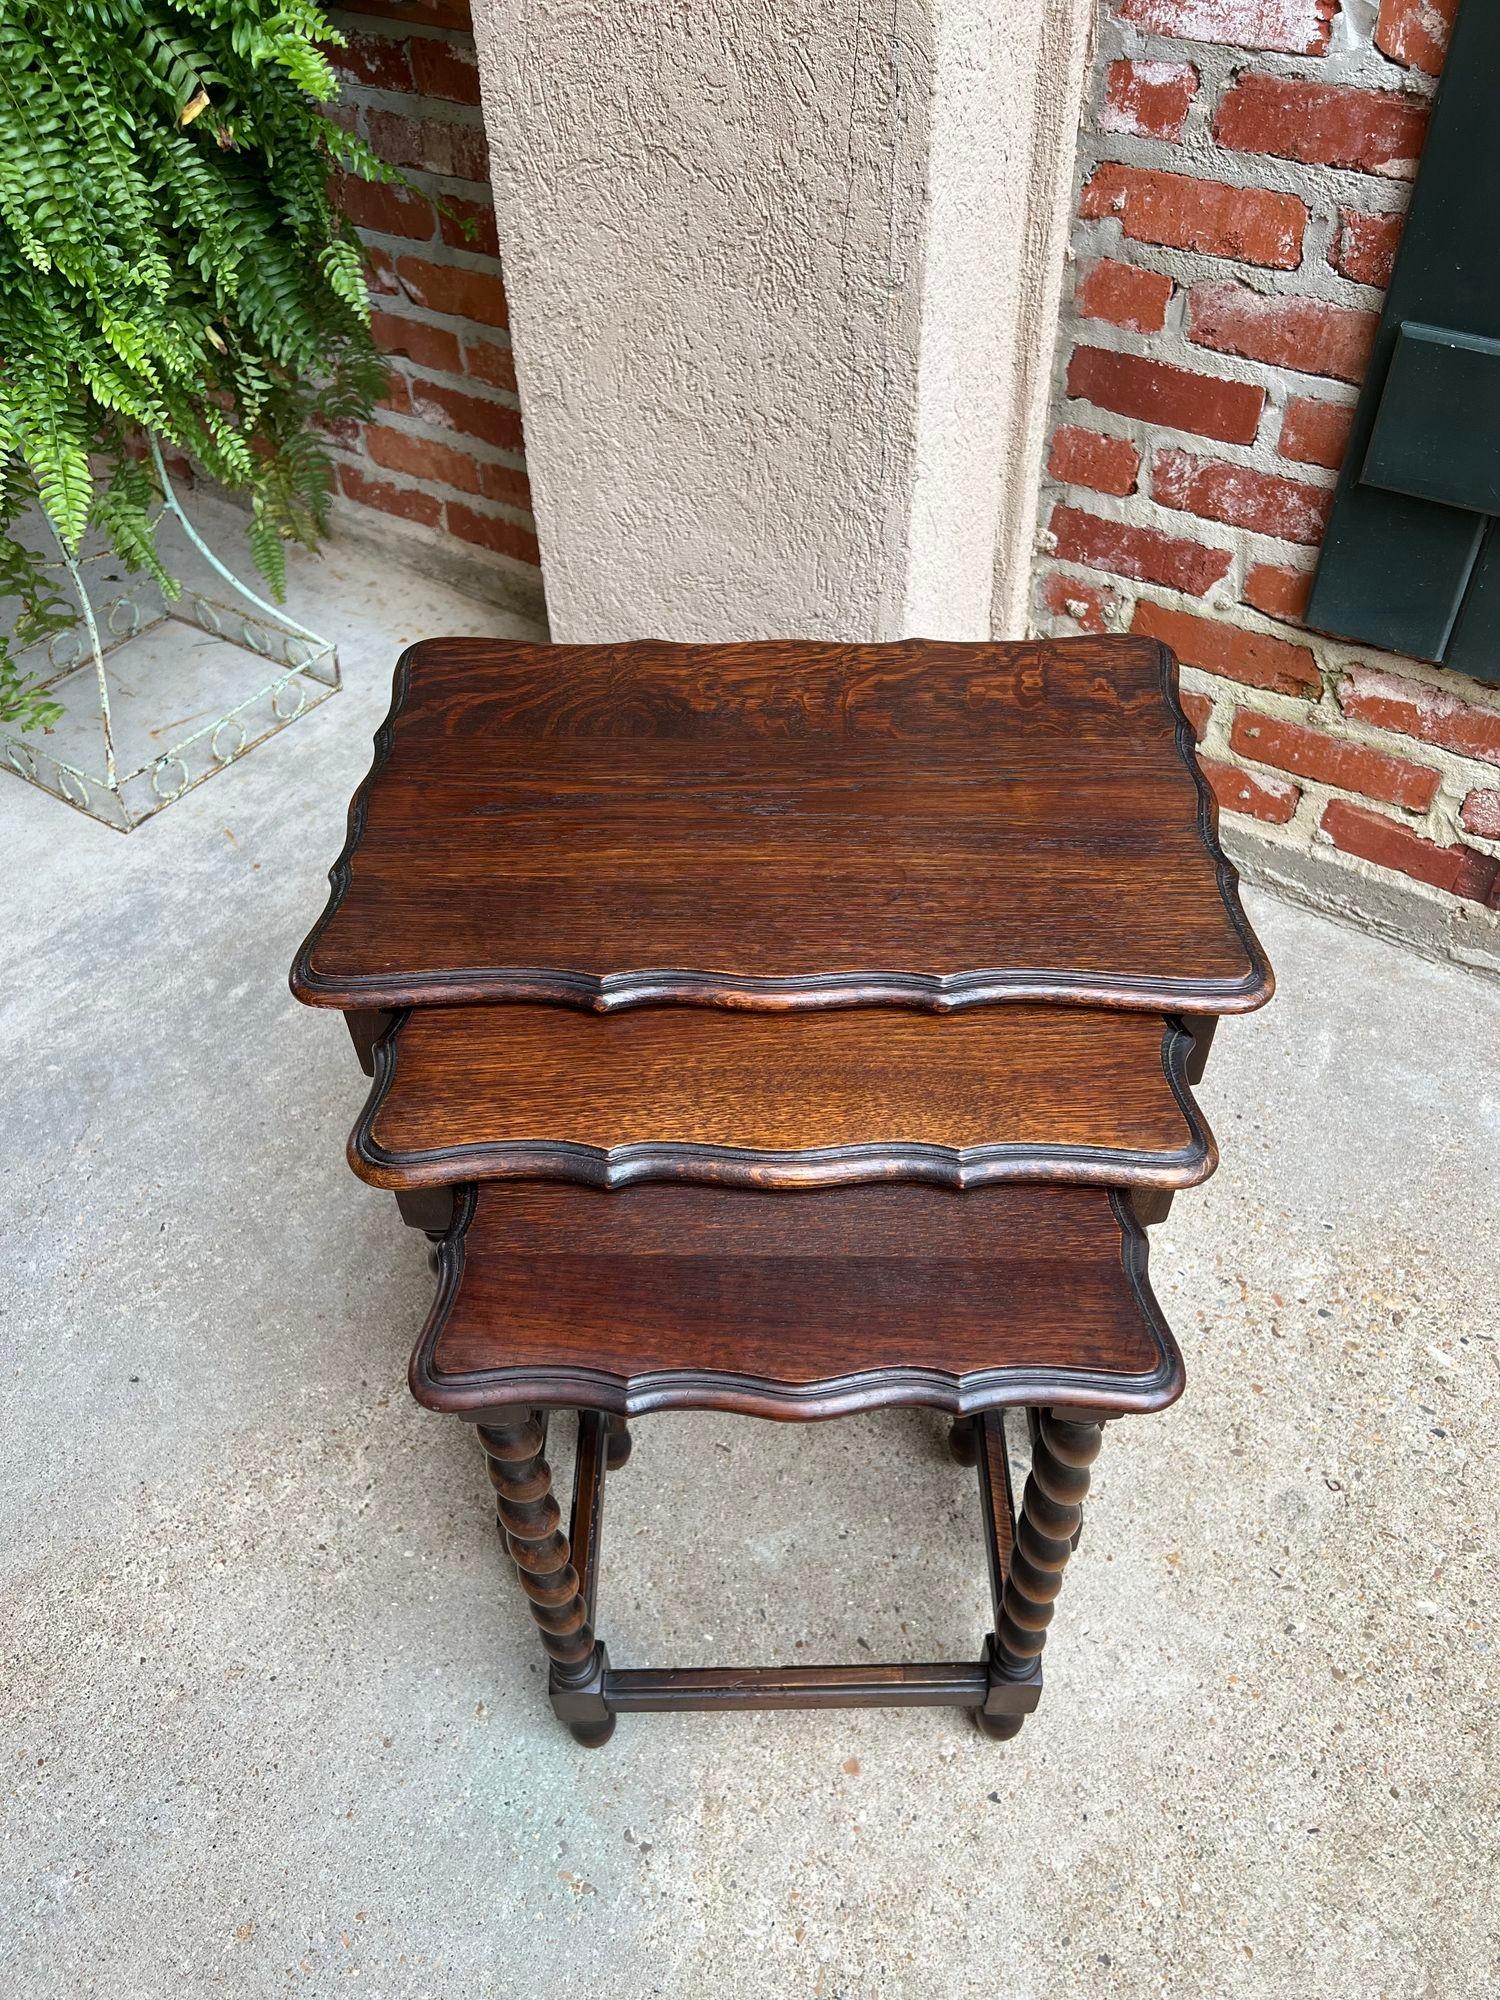 Set 3 Antique English Nesting Table End Sofa Table Barley Twist Tiger Dark Oak.

Direct from England, a complete set of 3 antique English nesting tables! With their fabulous style, size and versatility, these sets are one of THE most popular items